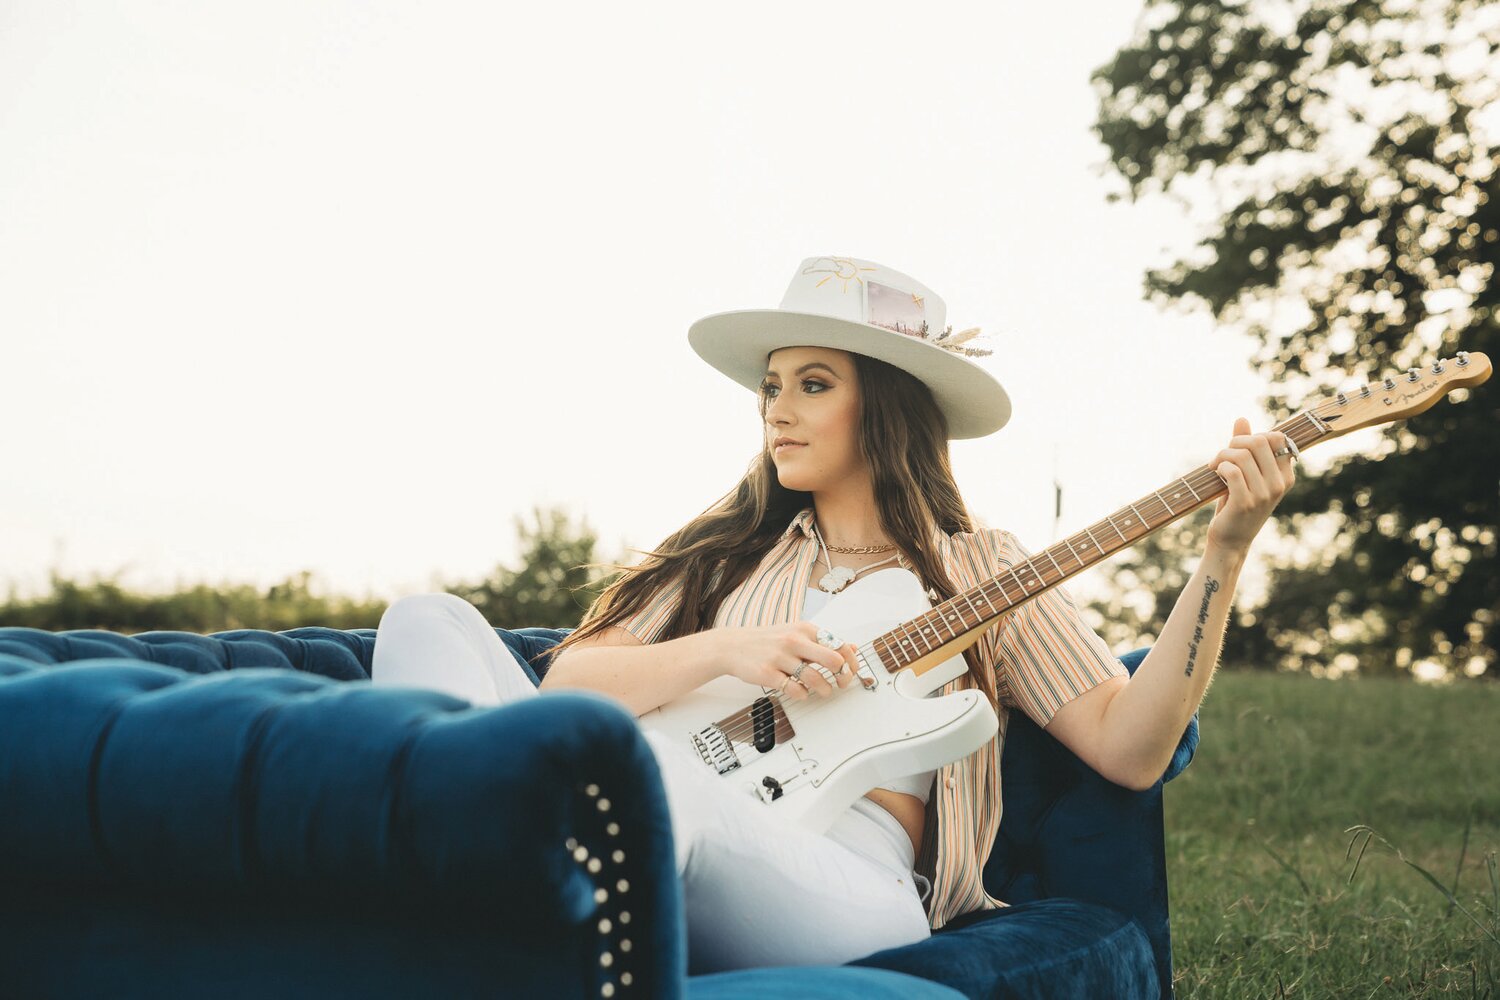 Country musician Maggie Baugh, originally from Boca Raton and now living in Nashville, will perform the national anthem at 11:45 a.m. and three sets during the event.